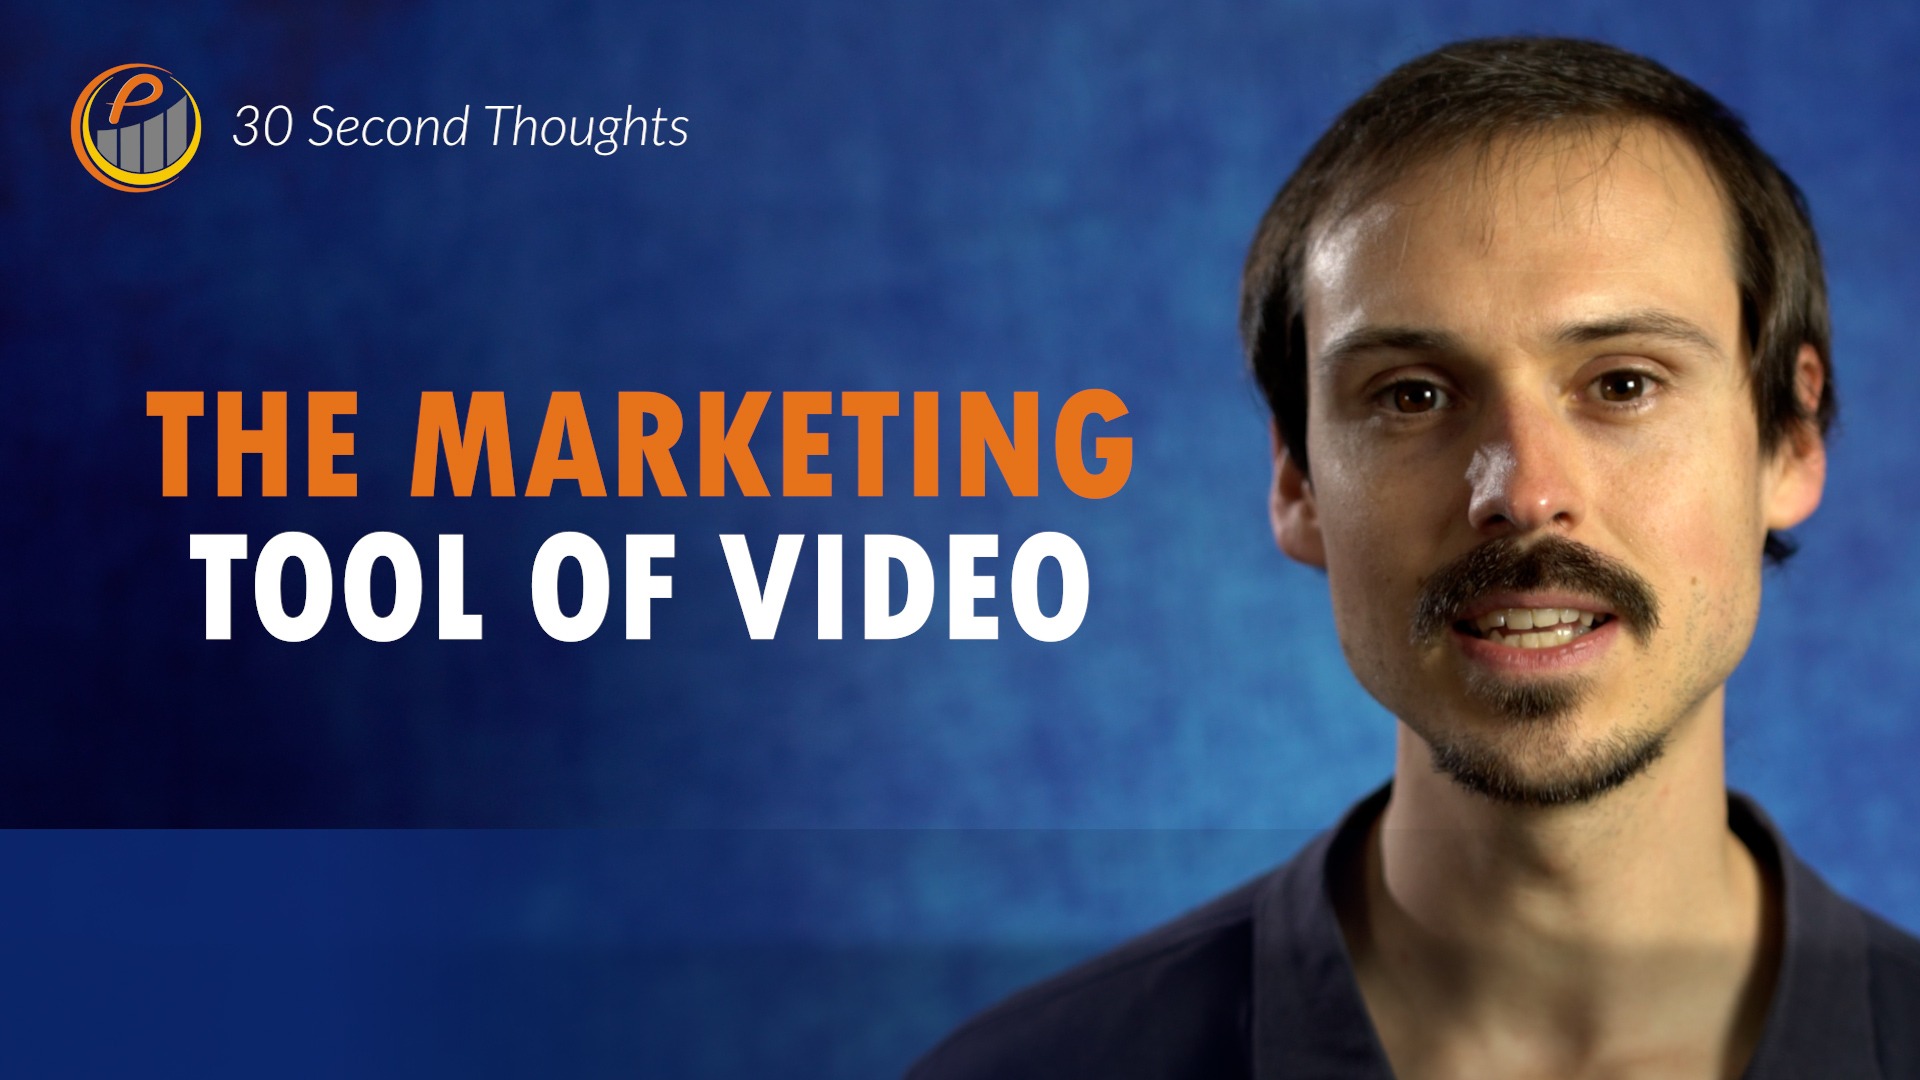 The Marketing Tool of Video